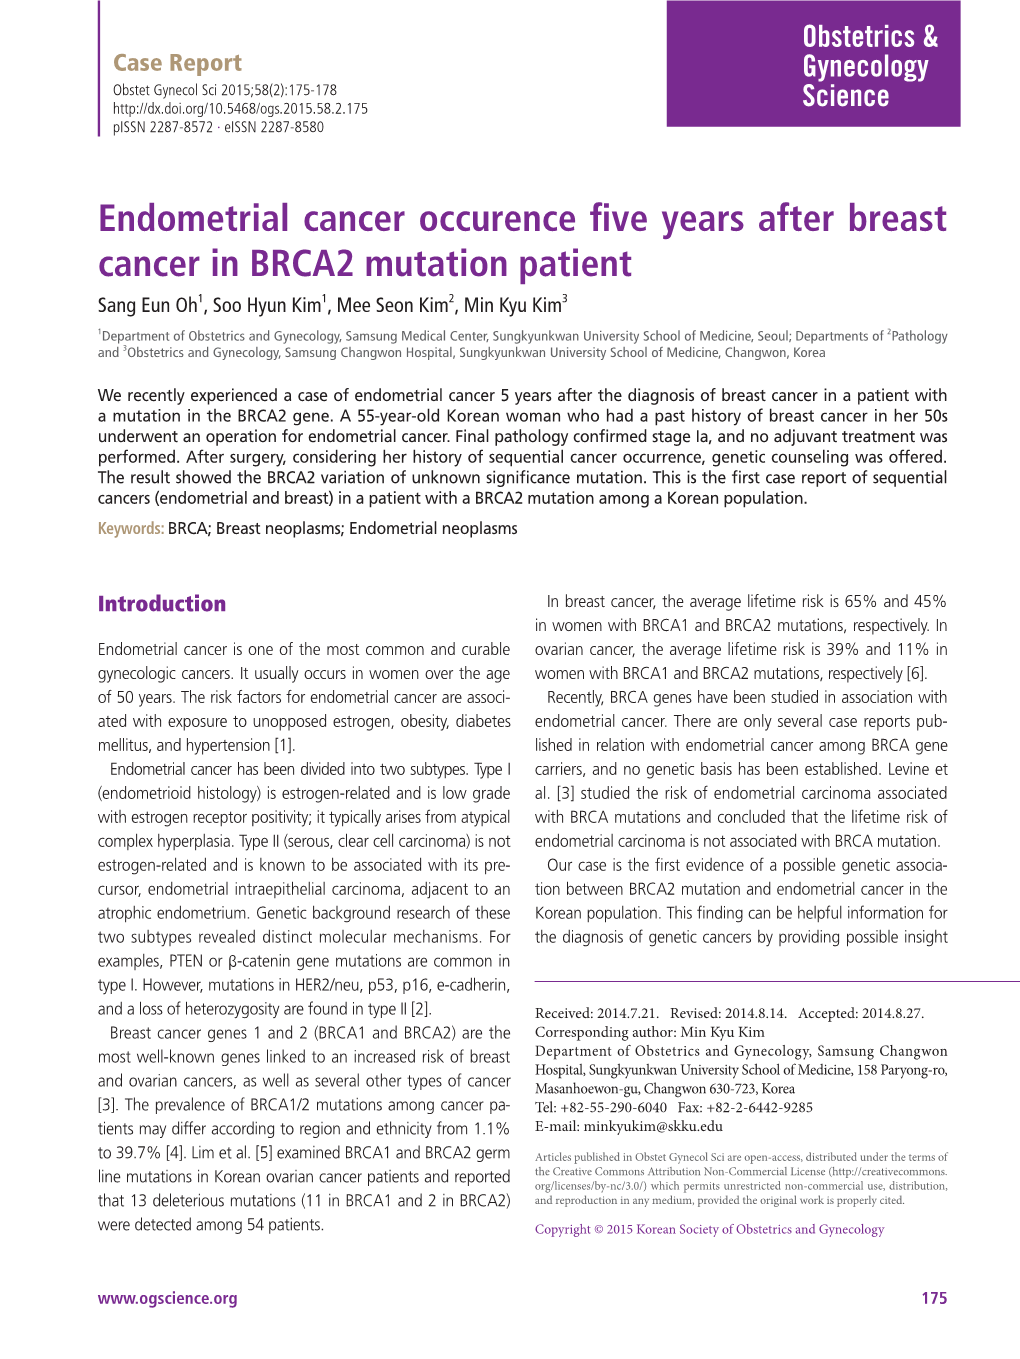 Endometrial Cancer Occurence Five Years After Breast Cancer in BRCA2 Mutation Patient